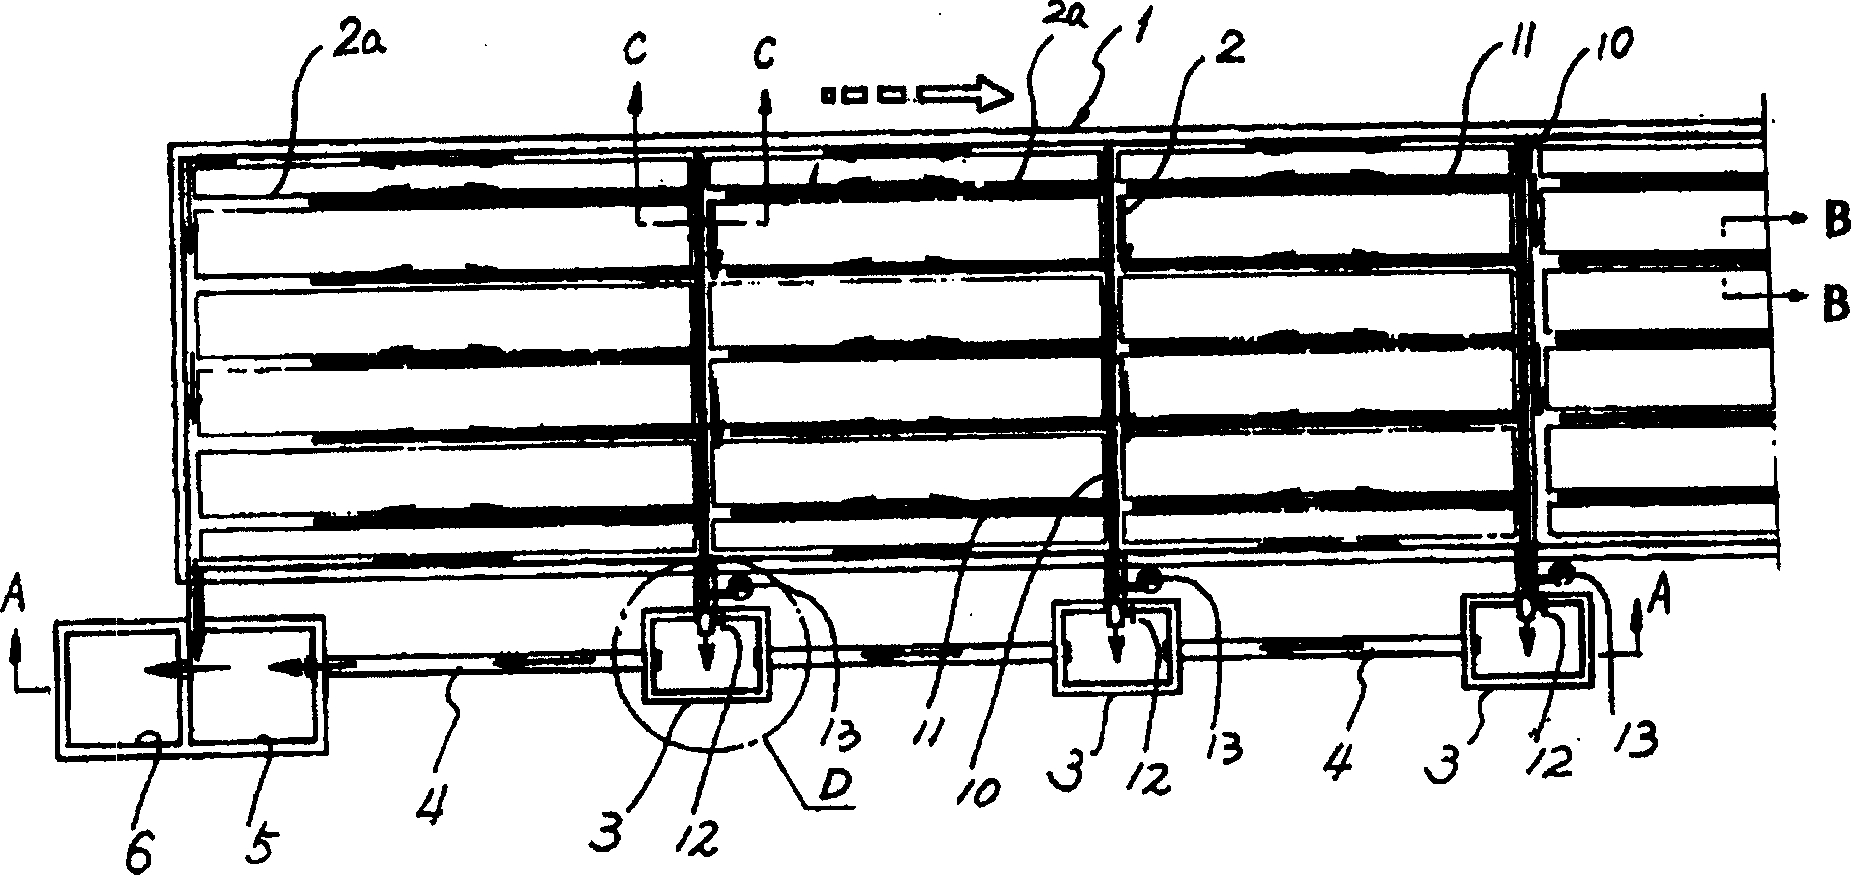 Apparatus for fermenting excrement, urine, garbage and sludge and reclaining sewage